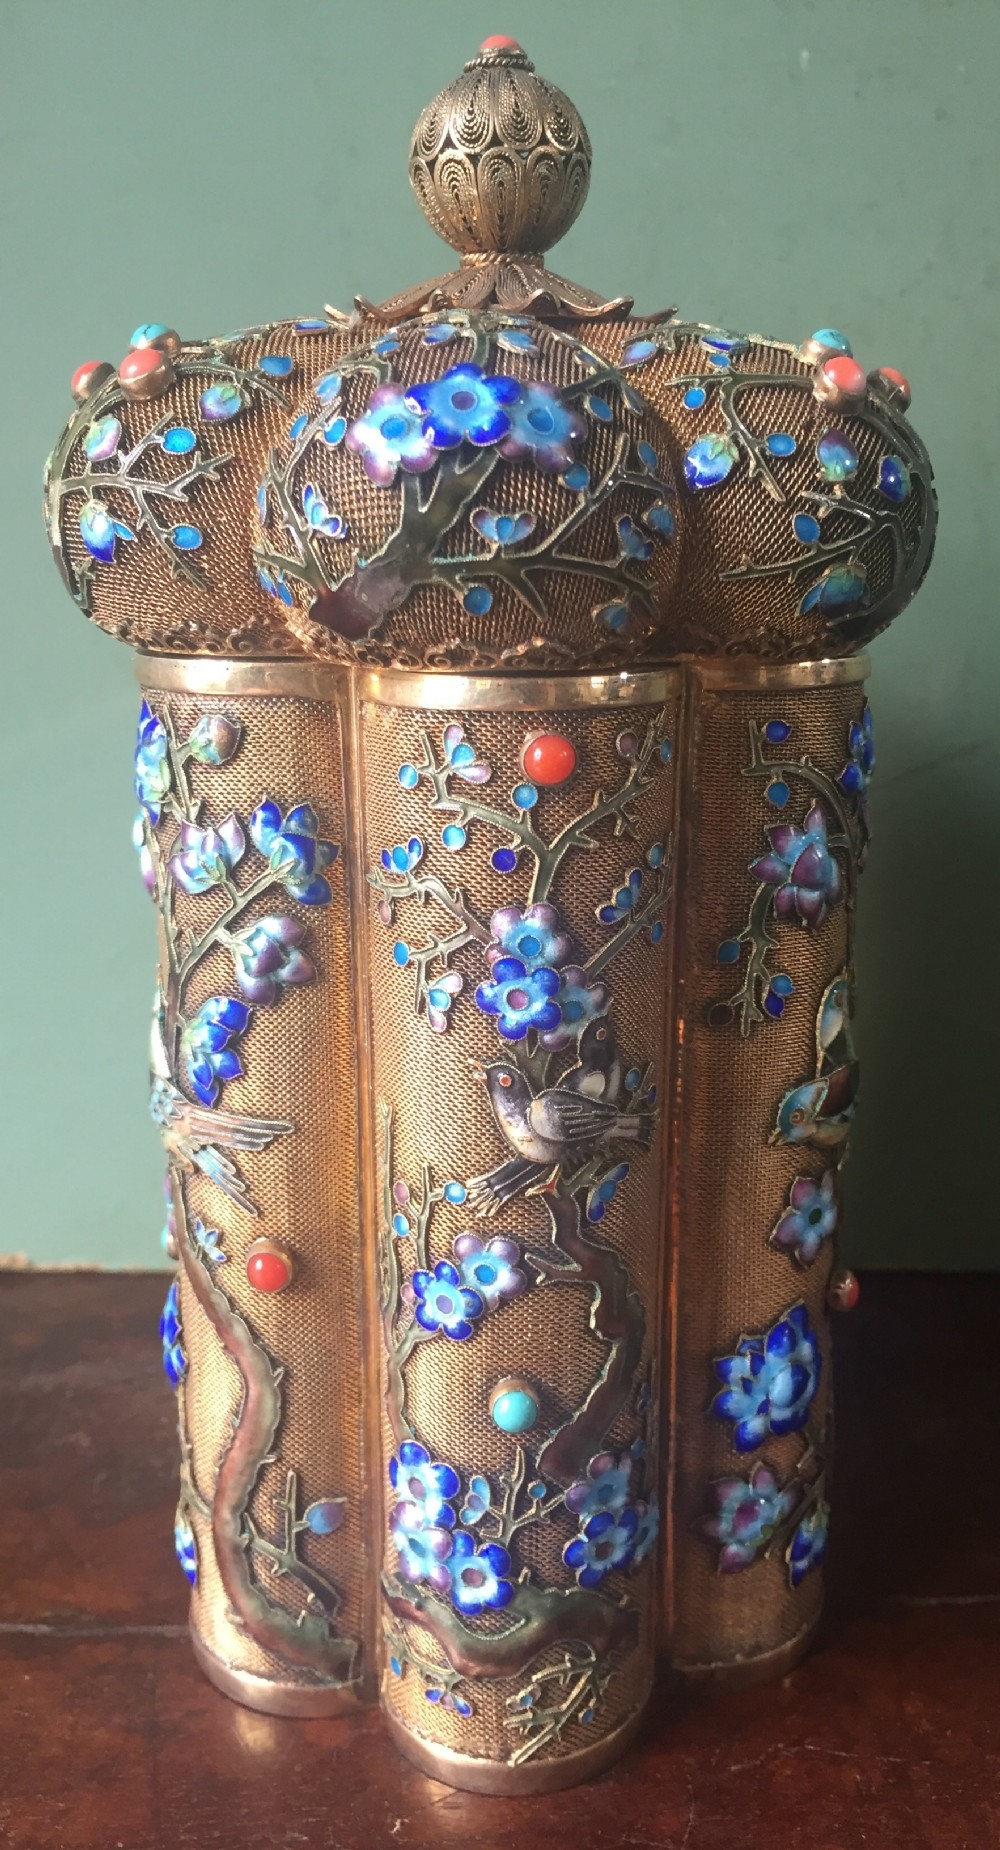 fine quality early c20th chinese silvergilt and enamel decorated caddy or casket